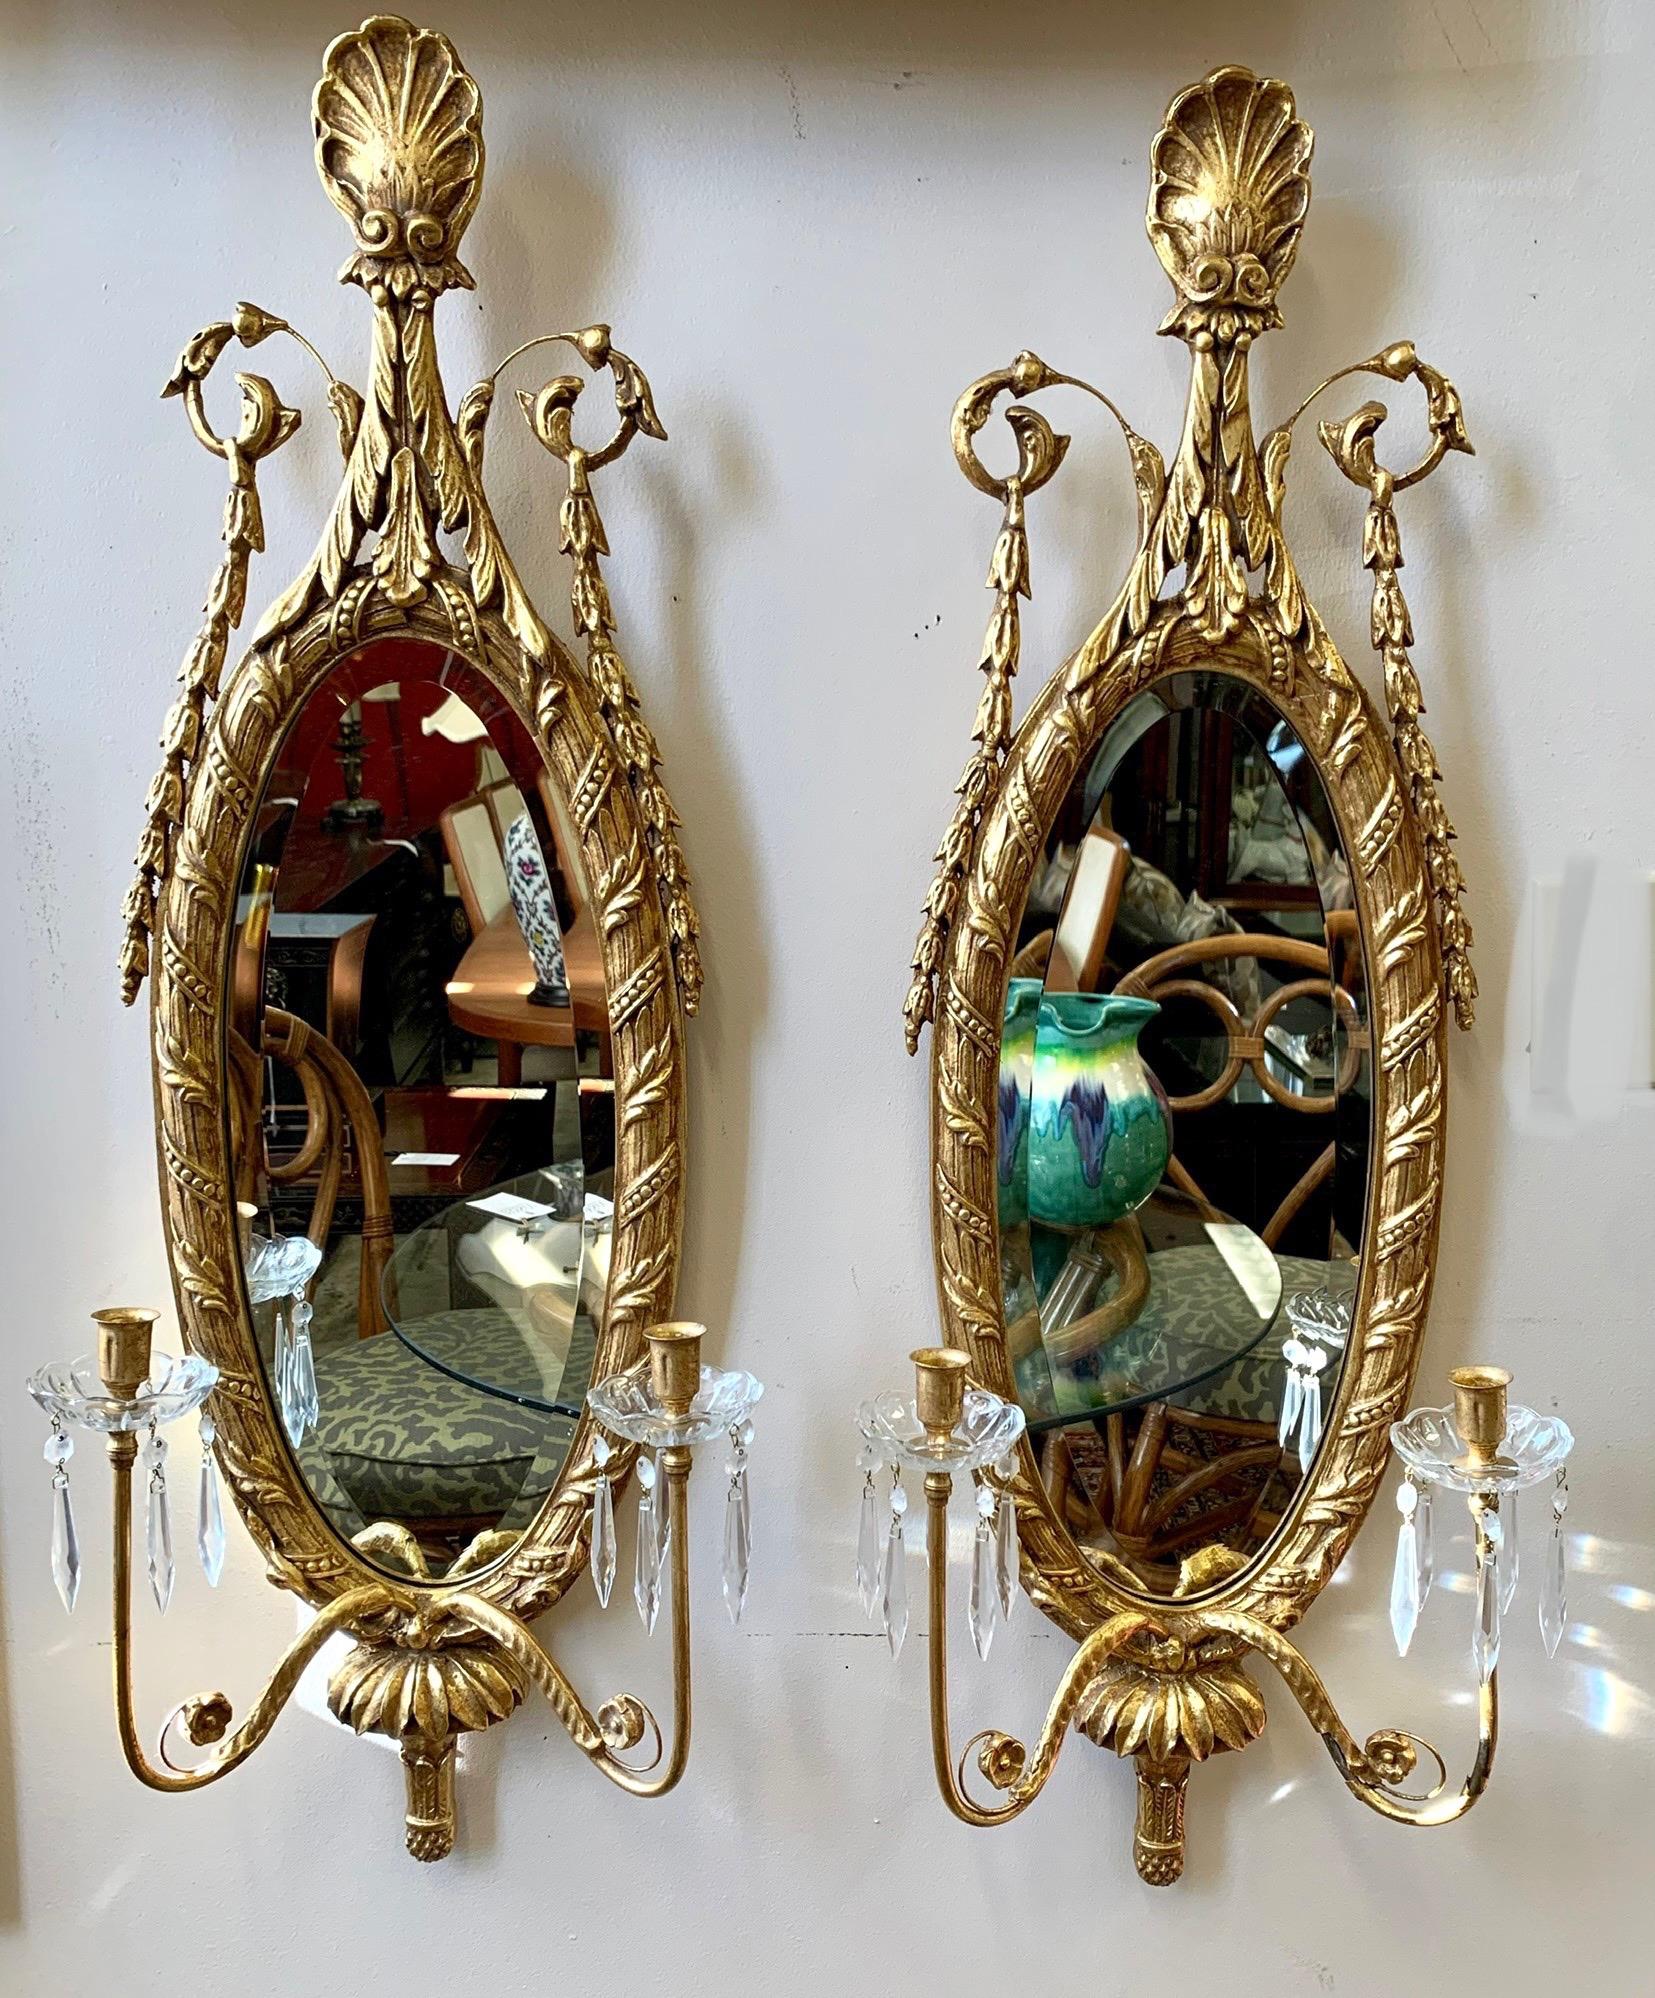 Stunning pair of tall carved oval giltwood mirrored sconces with intricate carved details. The two arms with crystal bobeches with dangling crystals hold two candles. Beveled glass. Made in Italy.